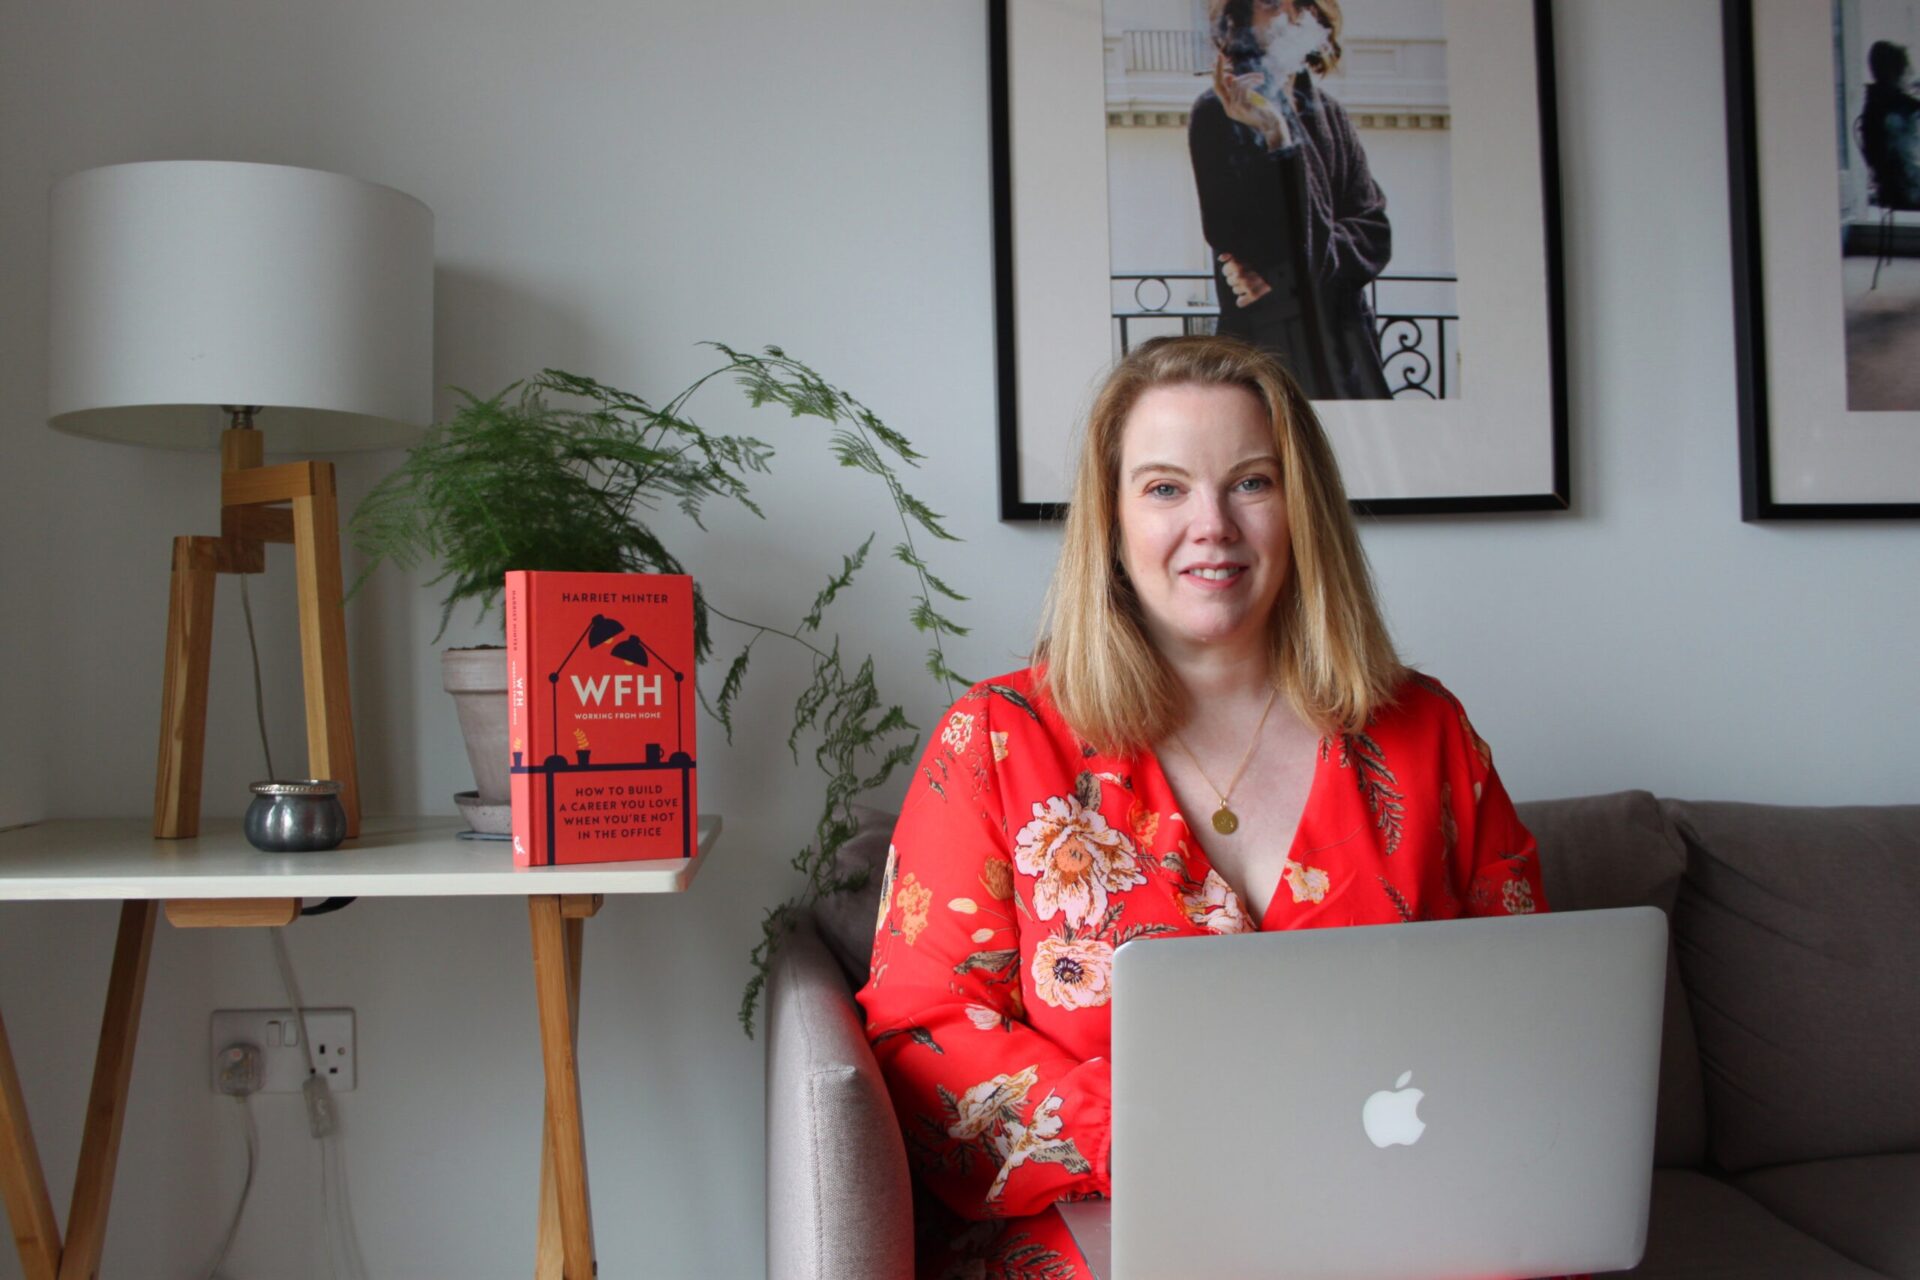 Home Instead launch ‘#beyourownboss’ campaign with Harriet Minter